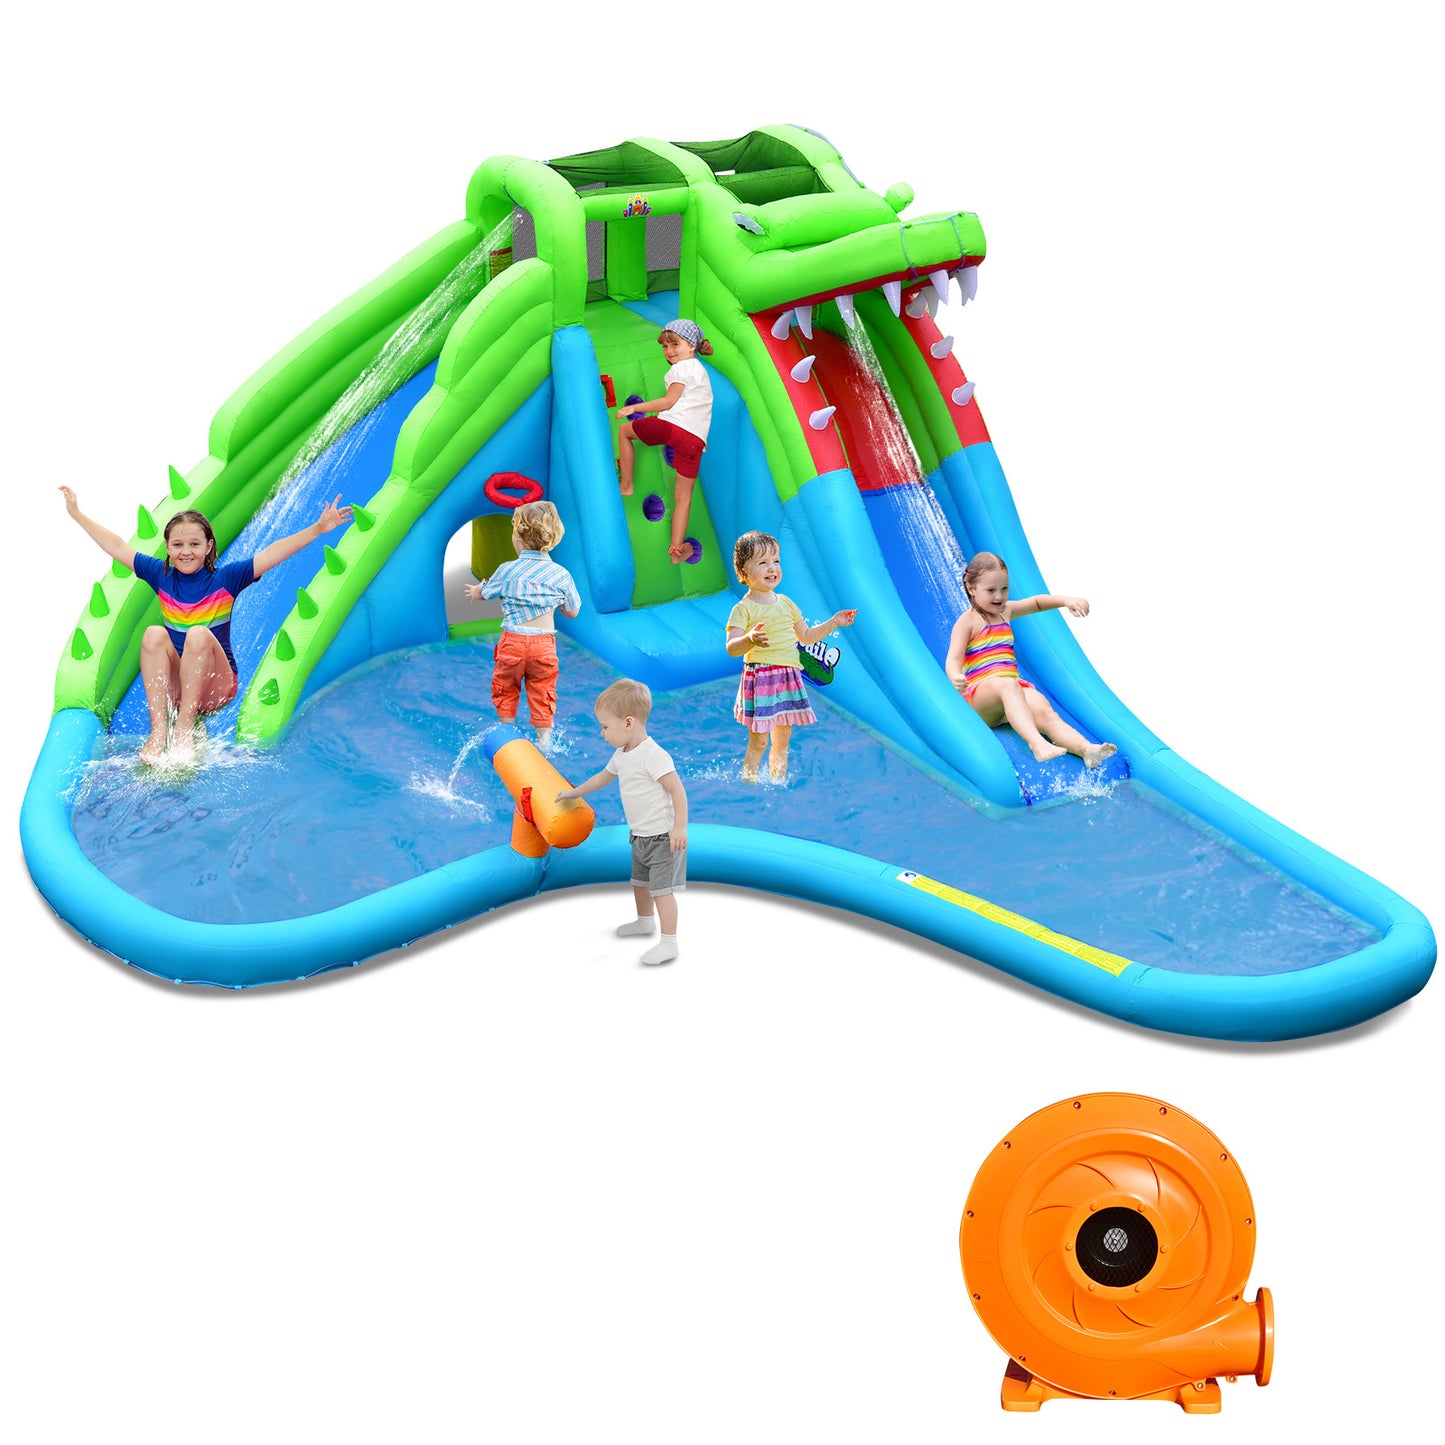 Giant 7 In 1 Inflatable Water Slide with 780W Air Blower